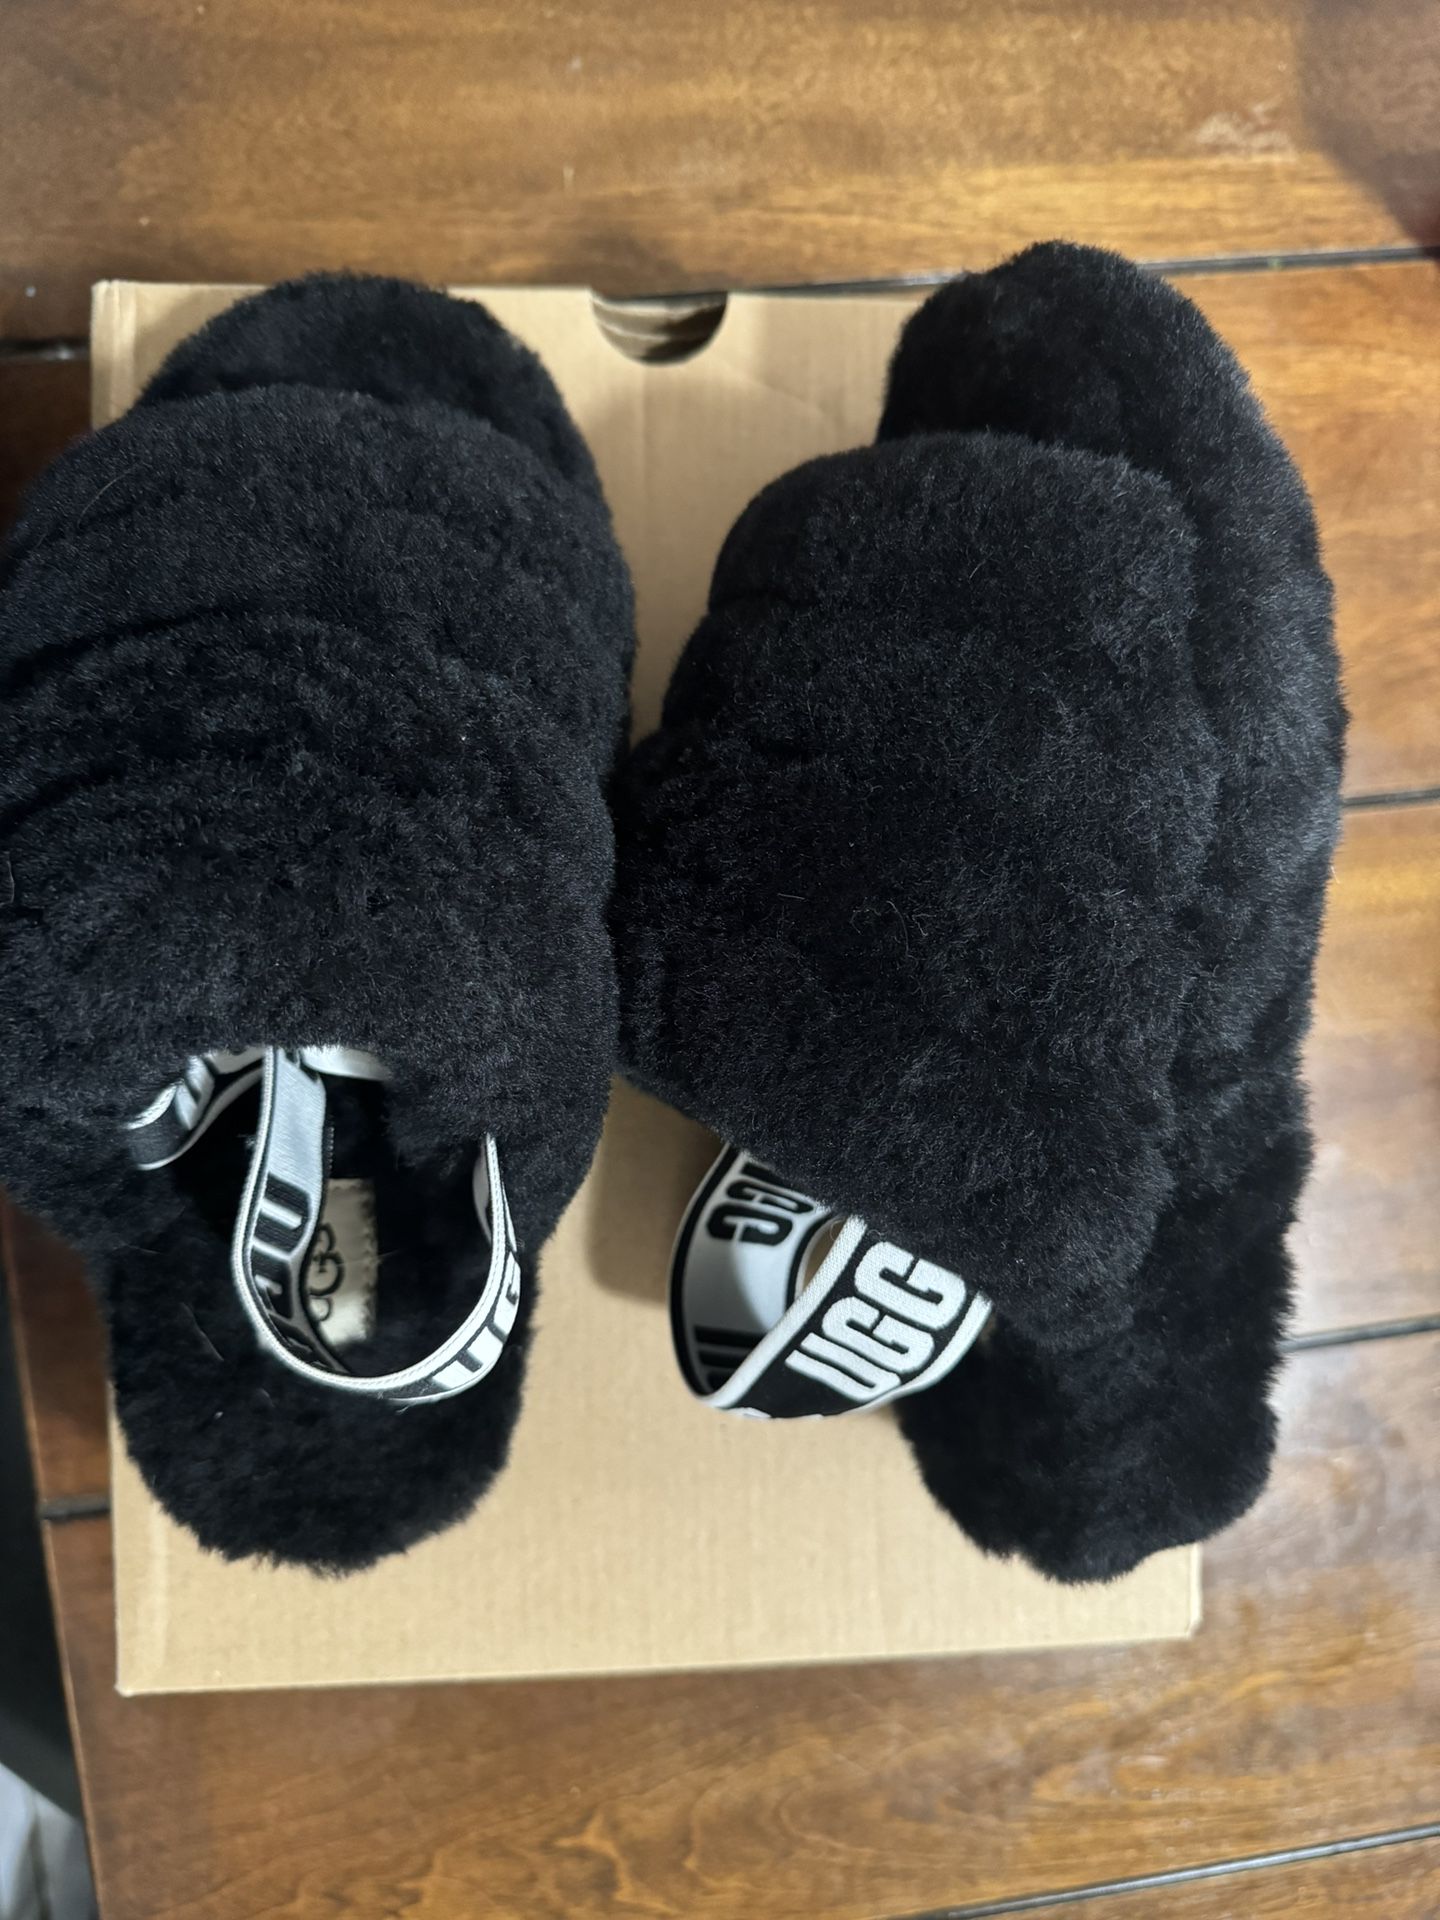 Ugg Slippers Size 5